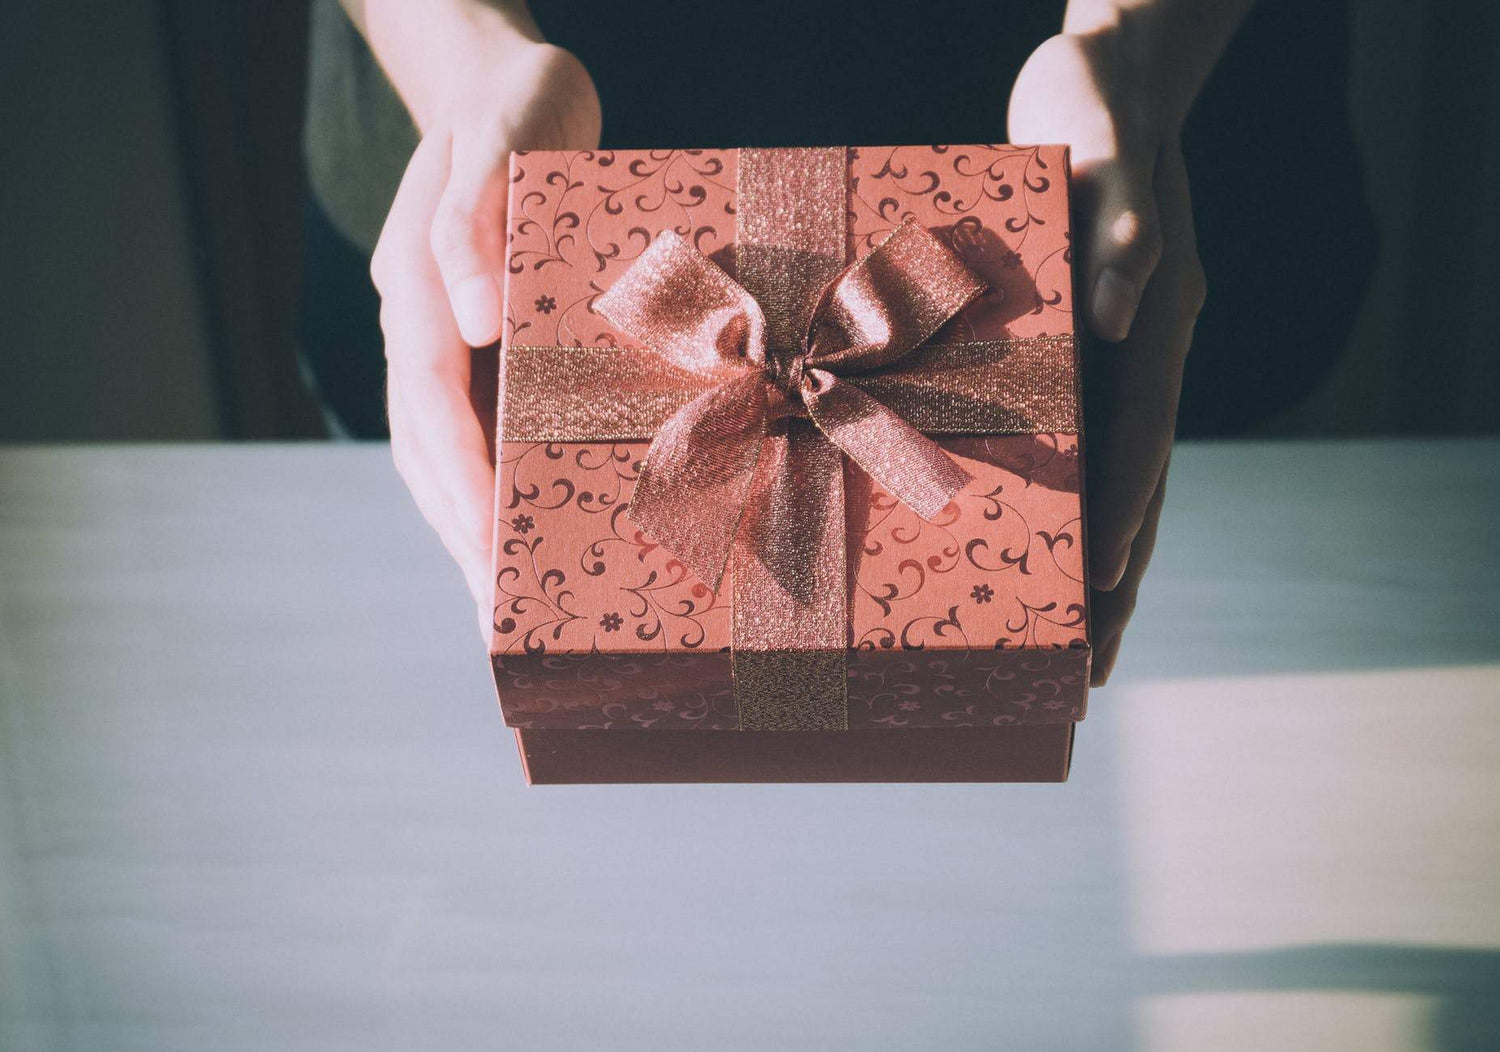 The rise and appeal of personalised gifts